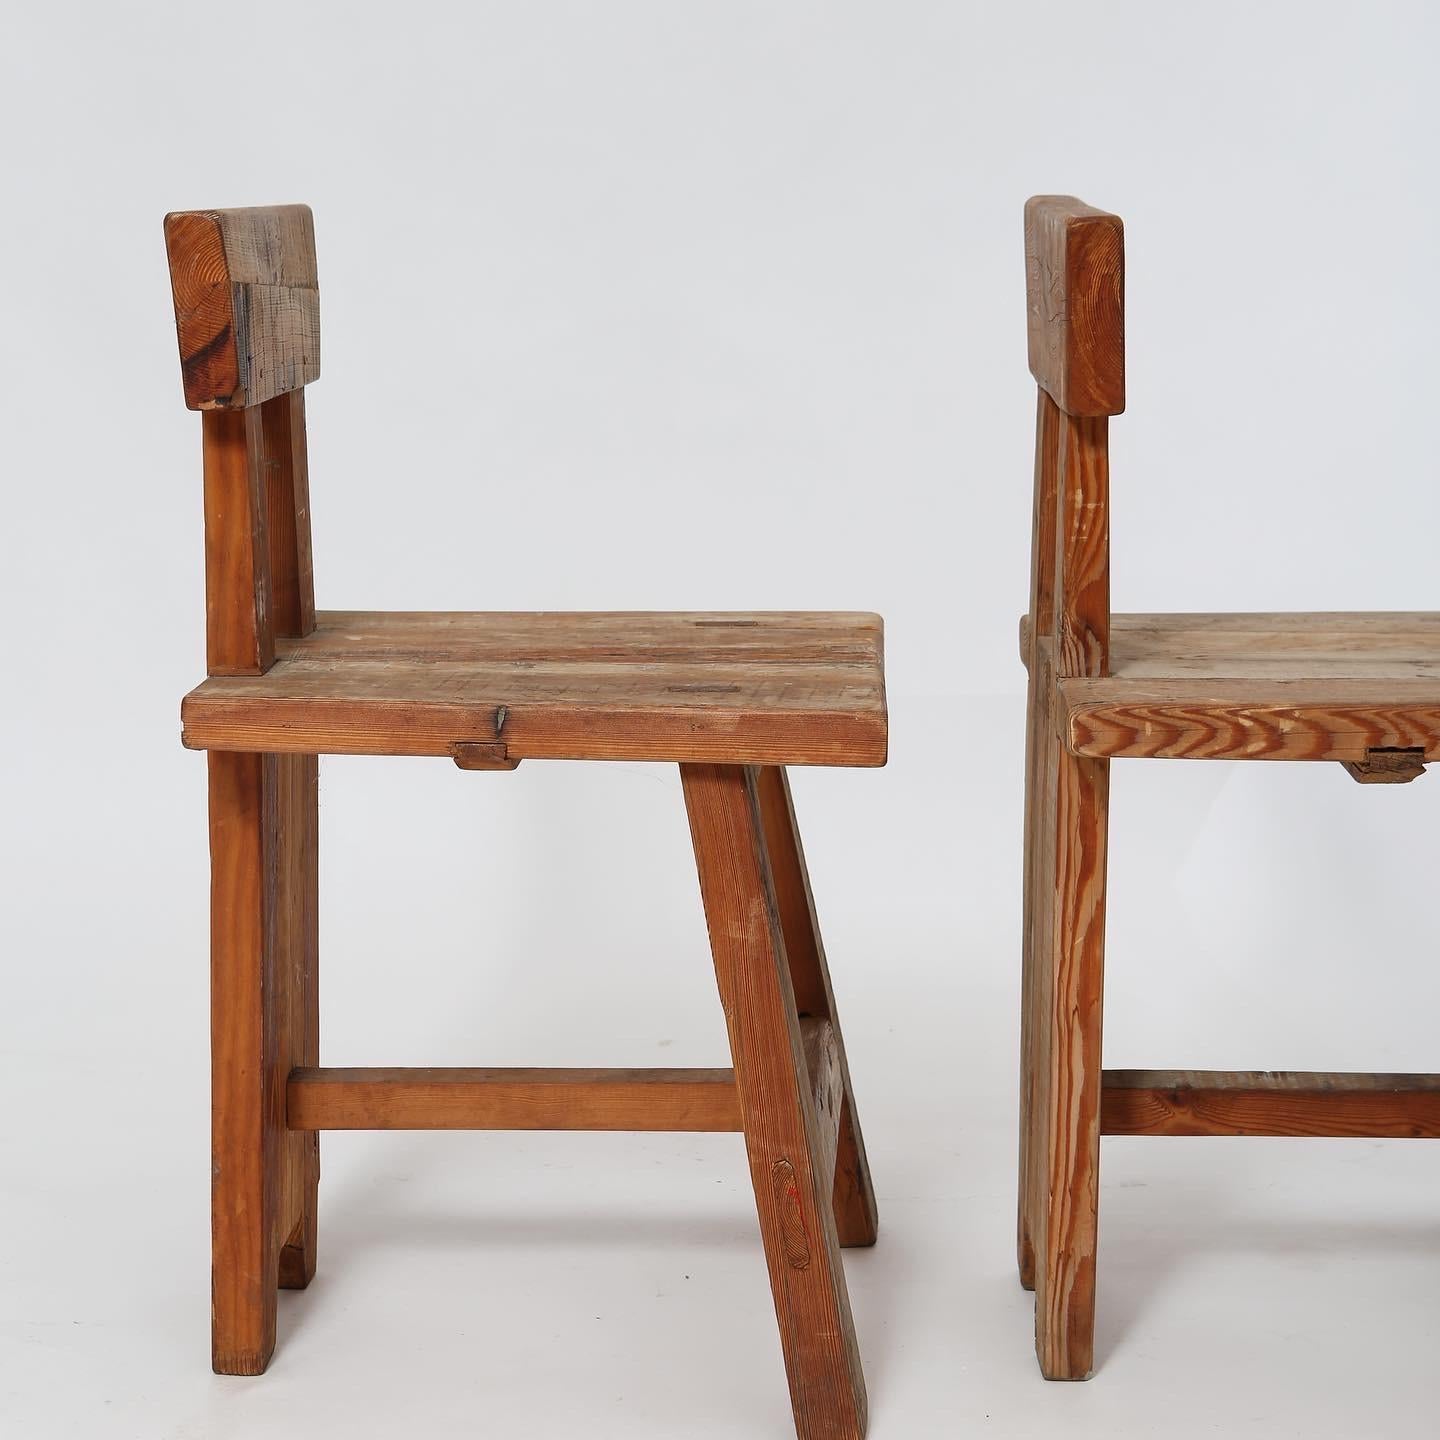 Hand-Crafted Modernist Pine Chairs, a Pair